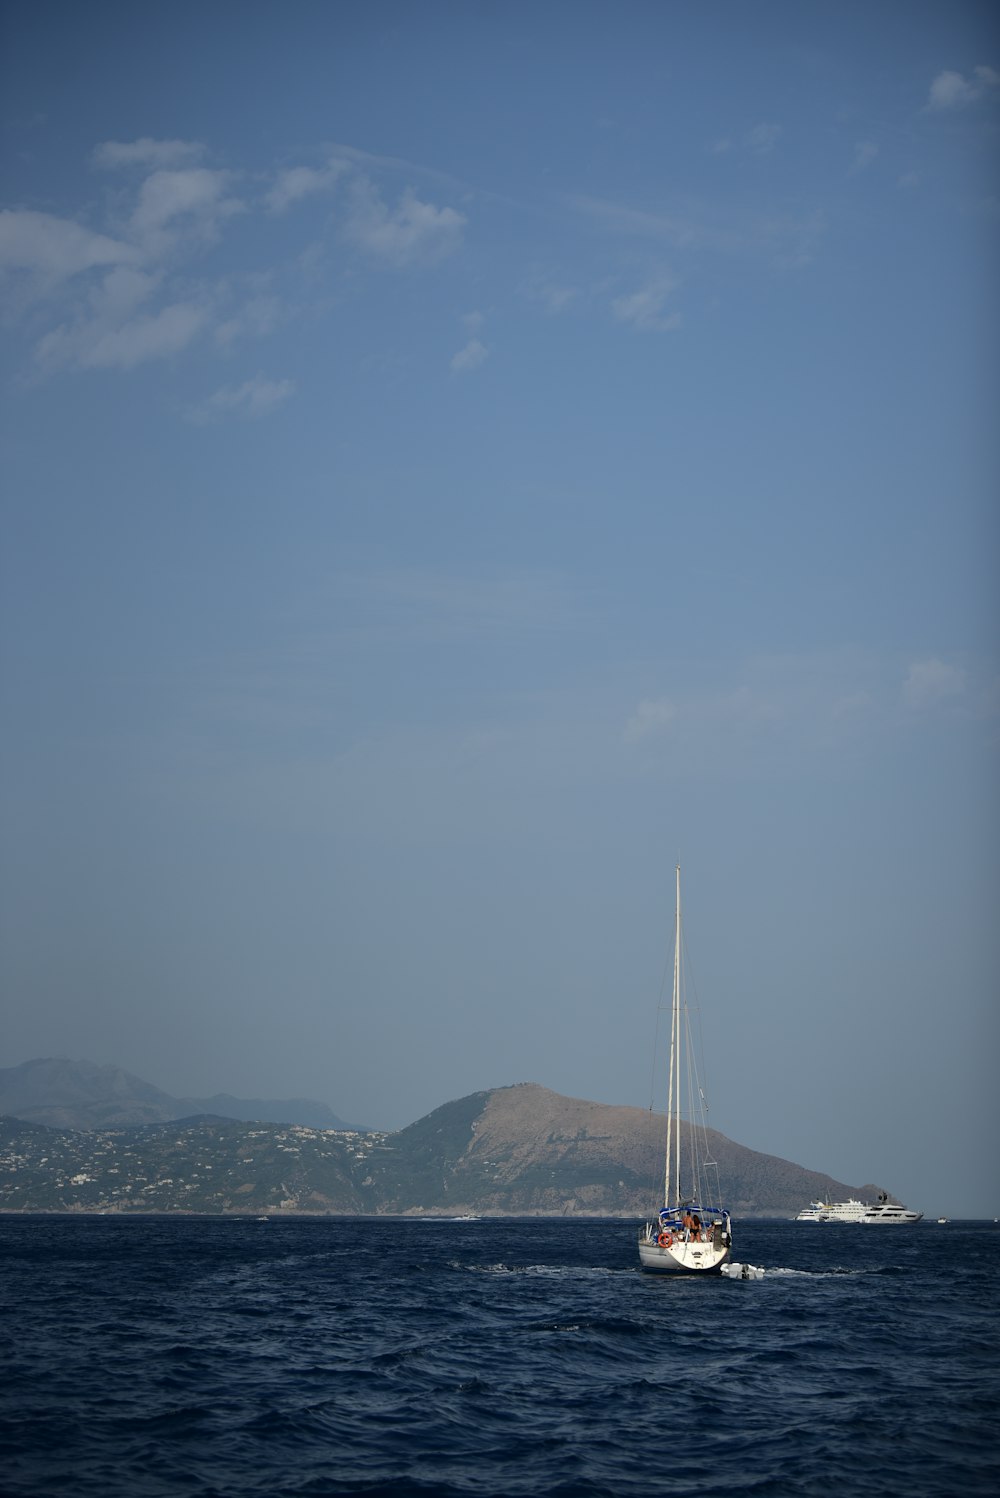 white sailboat on sea under blue sky during daytime